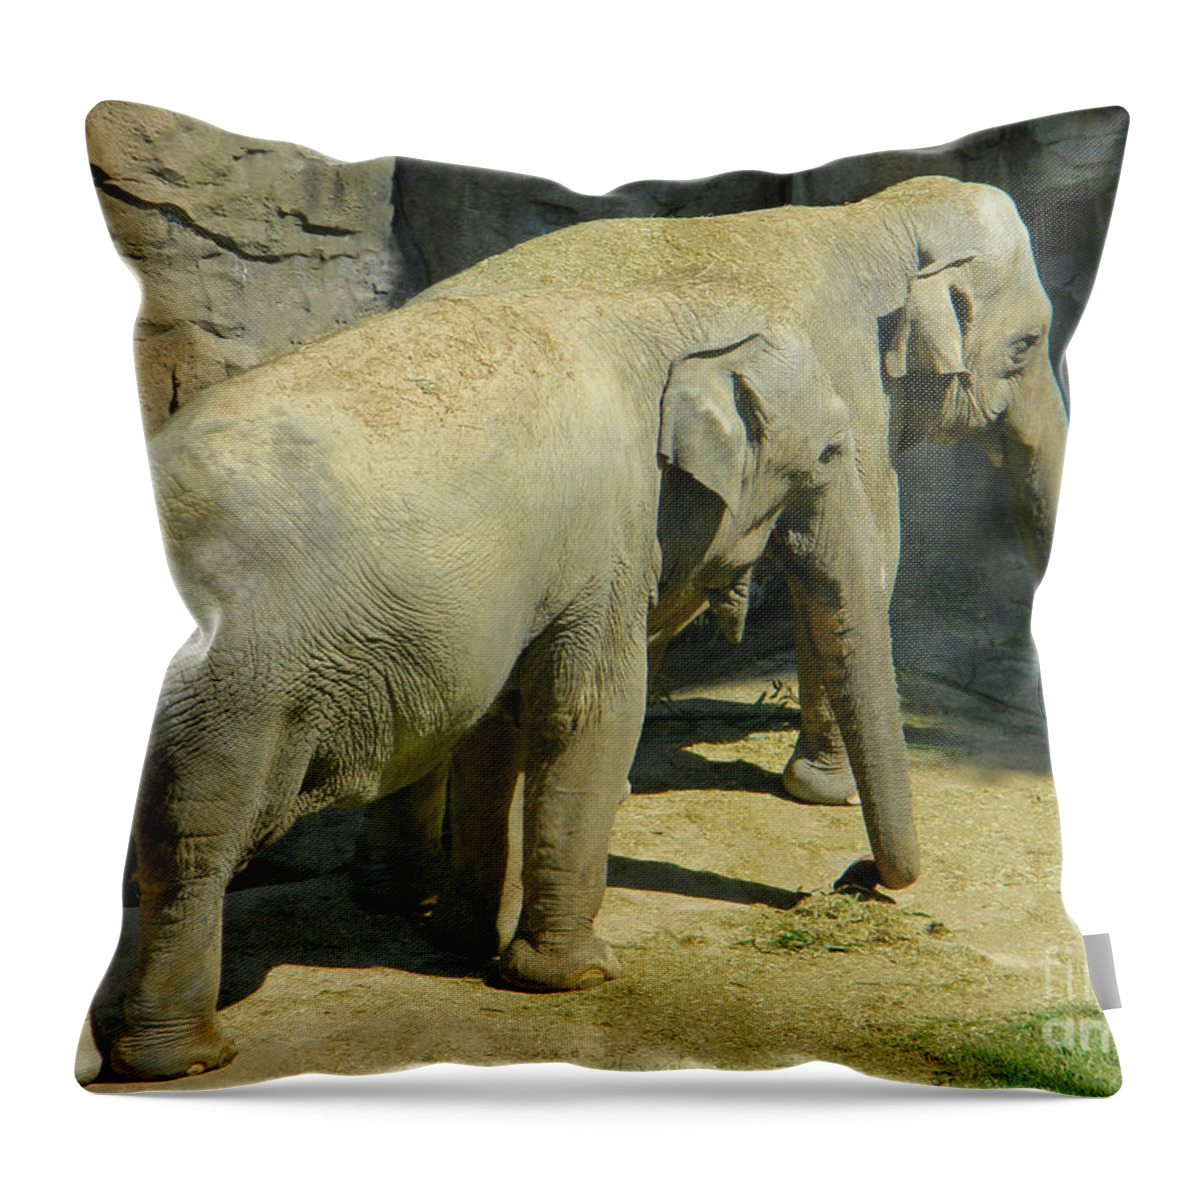 Standing Side By Side Throw Pillow featuring the photograph Standing Side By Side by Emmy Vickers